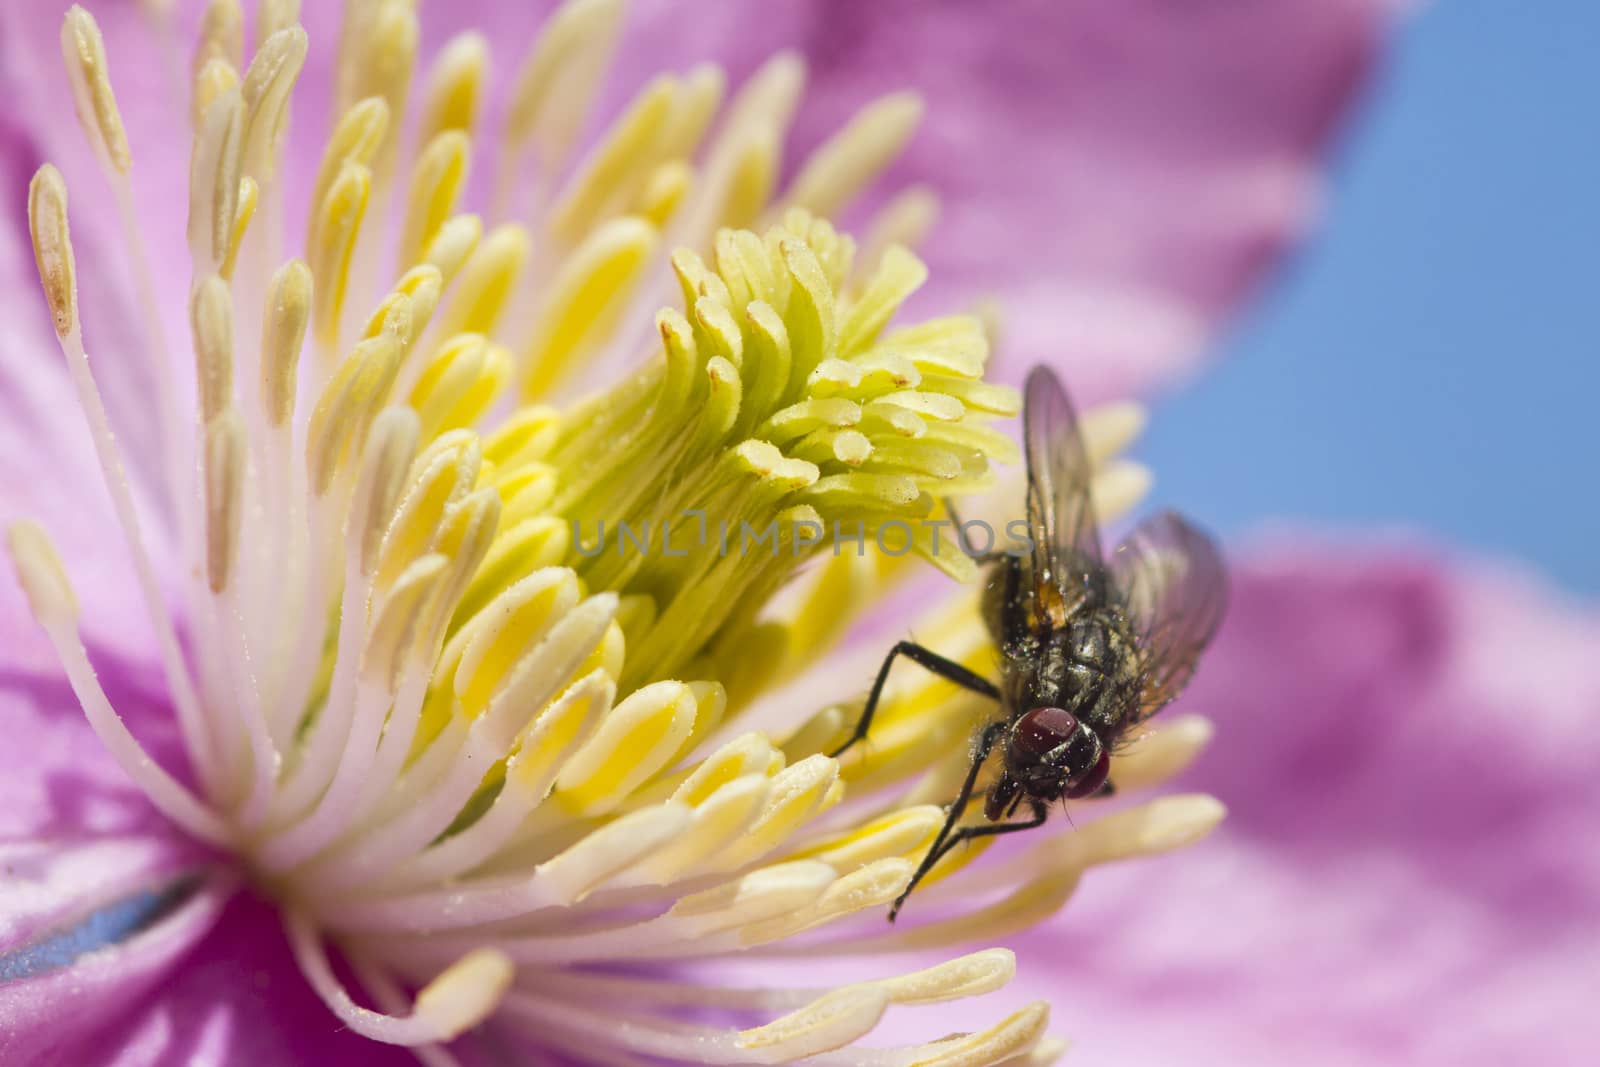 Clematis flower with a Fly perched closeup
